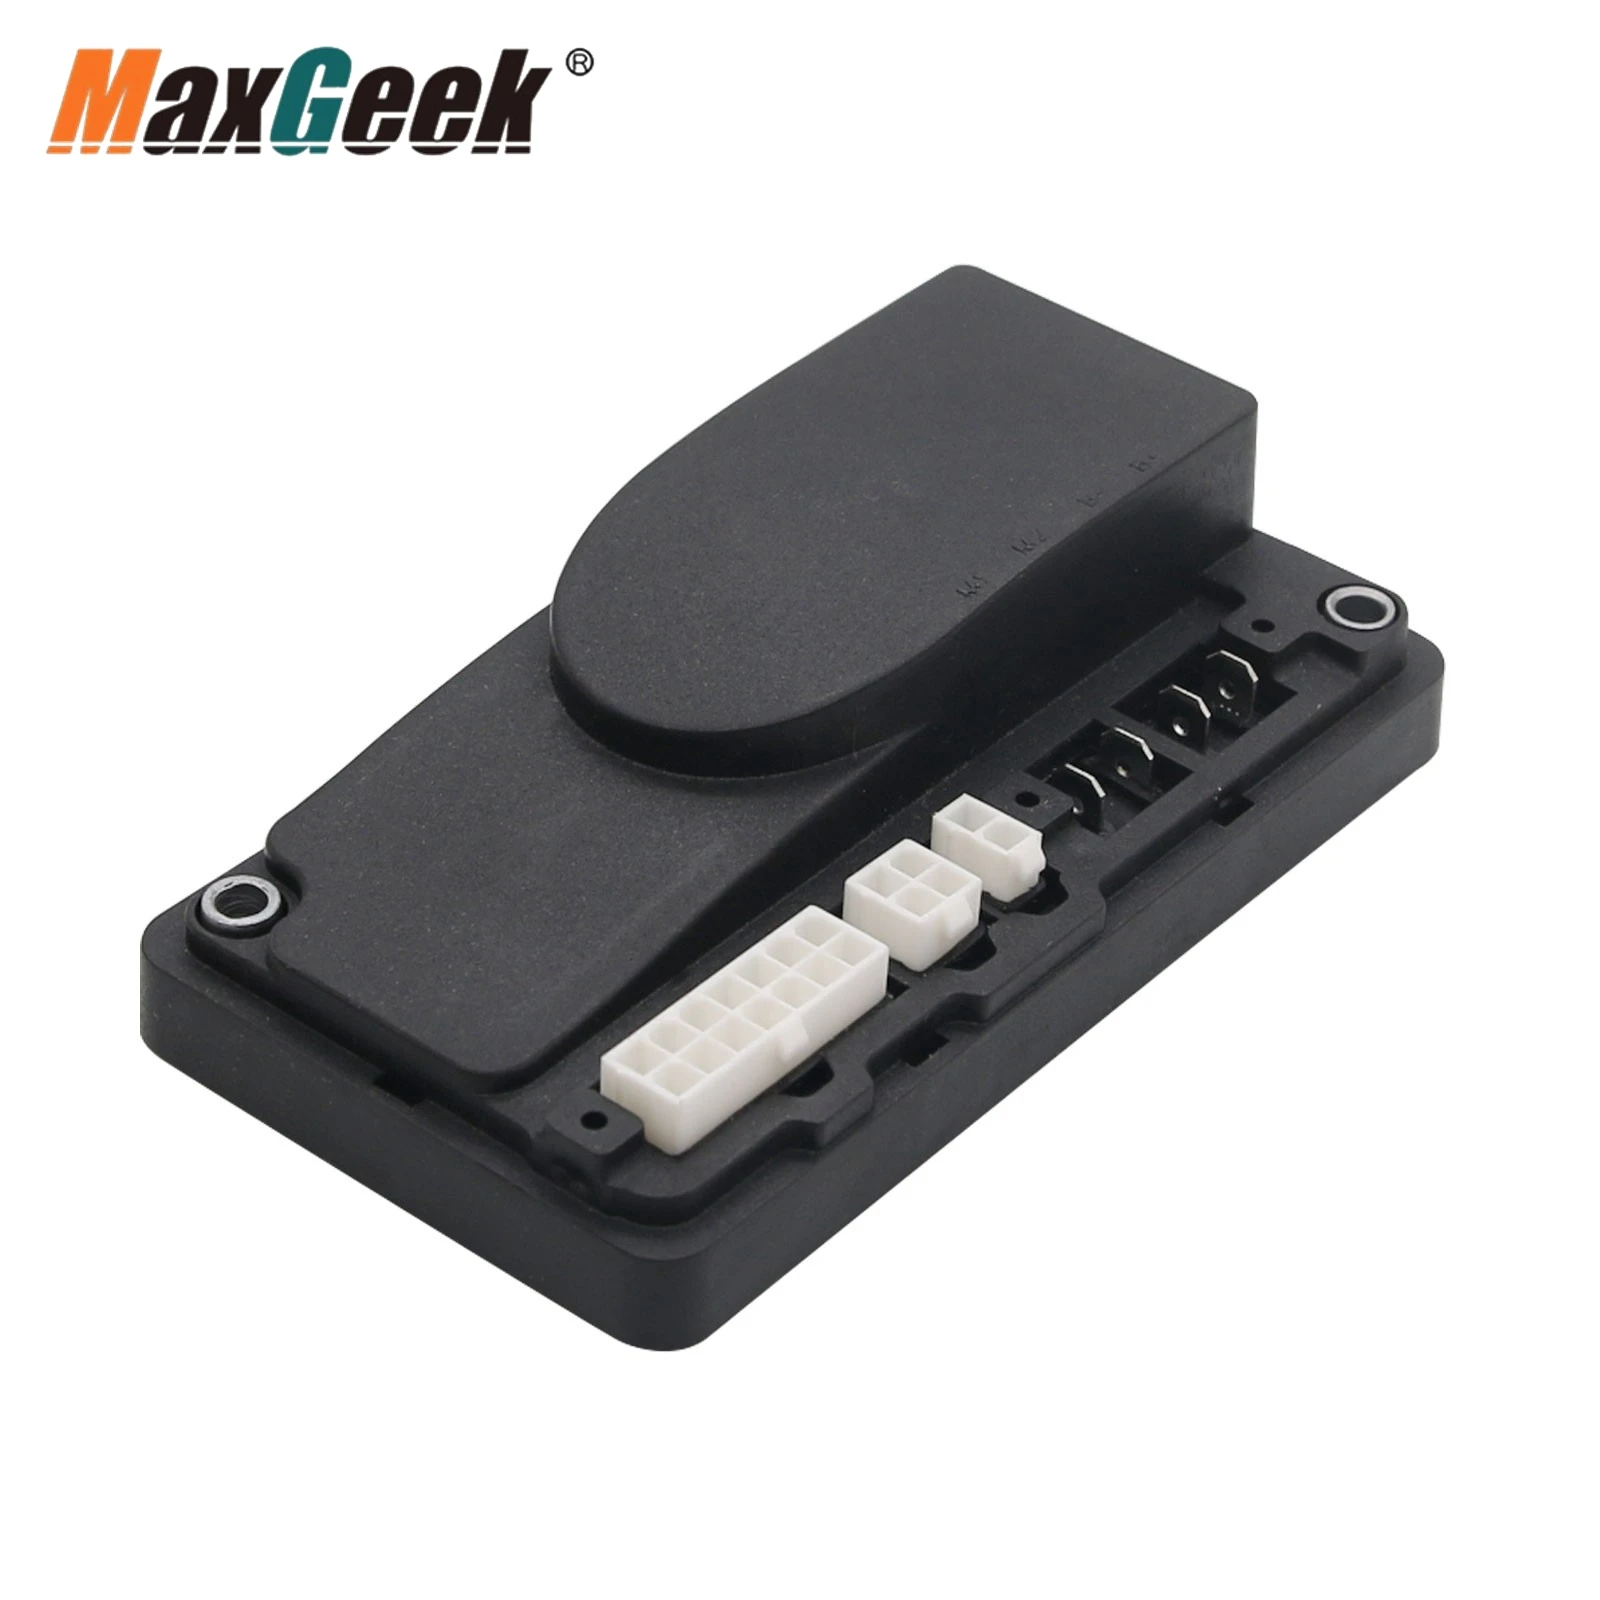 

Maxgeek DC 24V 90A 1212P-2501 Motor Controller Brush Permanent Magnetism Curtis